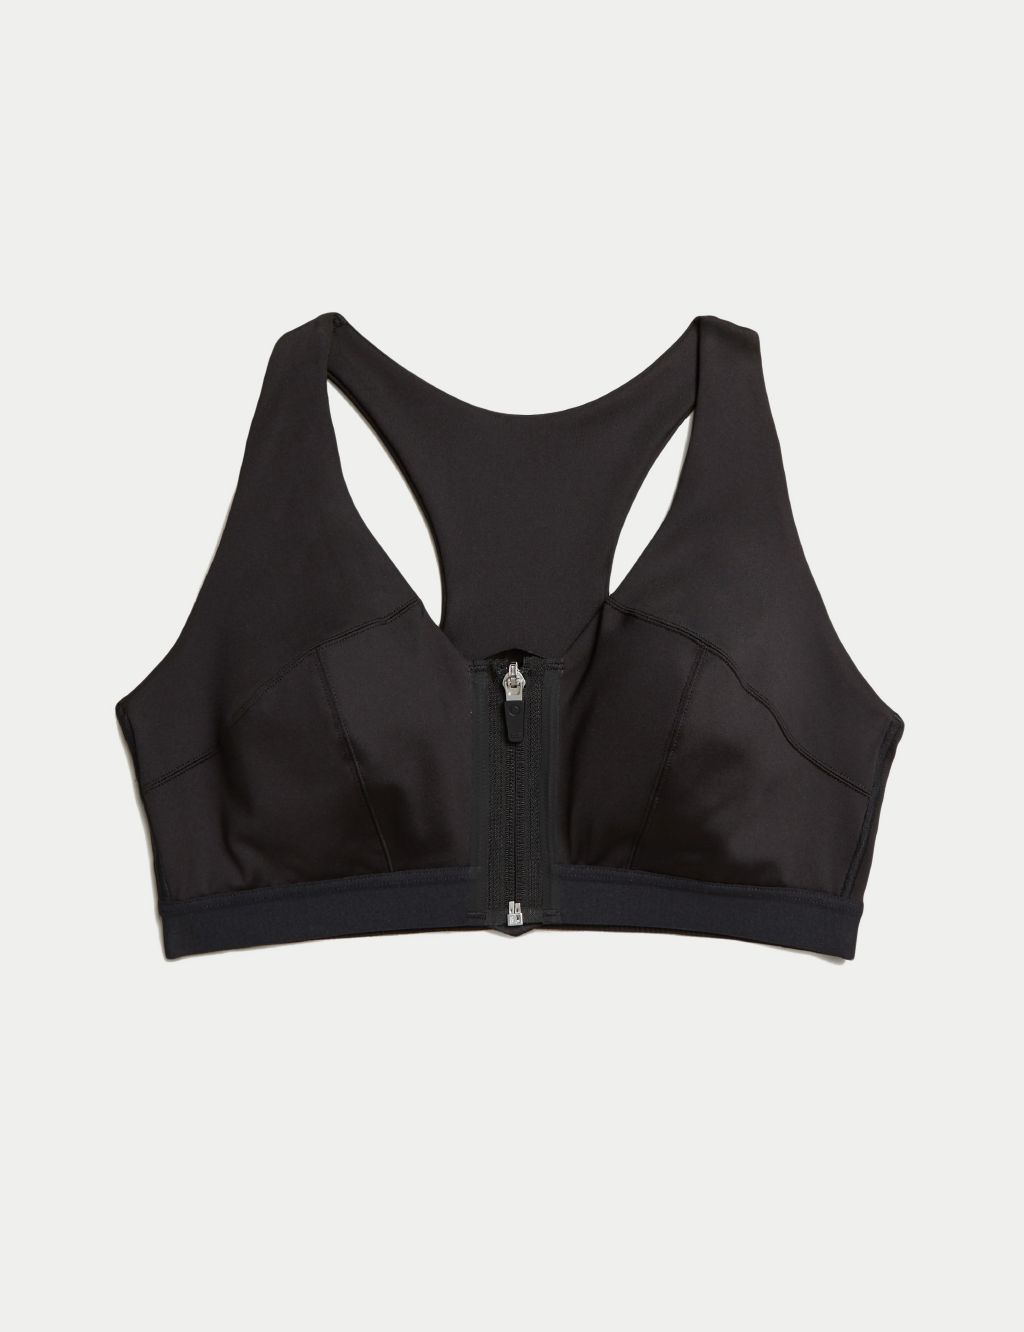 36A SPORTS BRA ex-M&S ACTIVE NON WIRED EXTRA HIGH IMPACT M+ Spencer - Helia  Beer Co